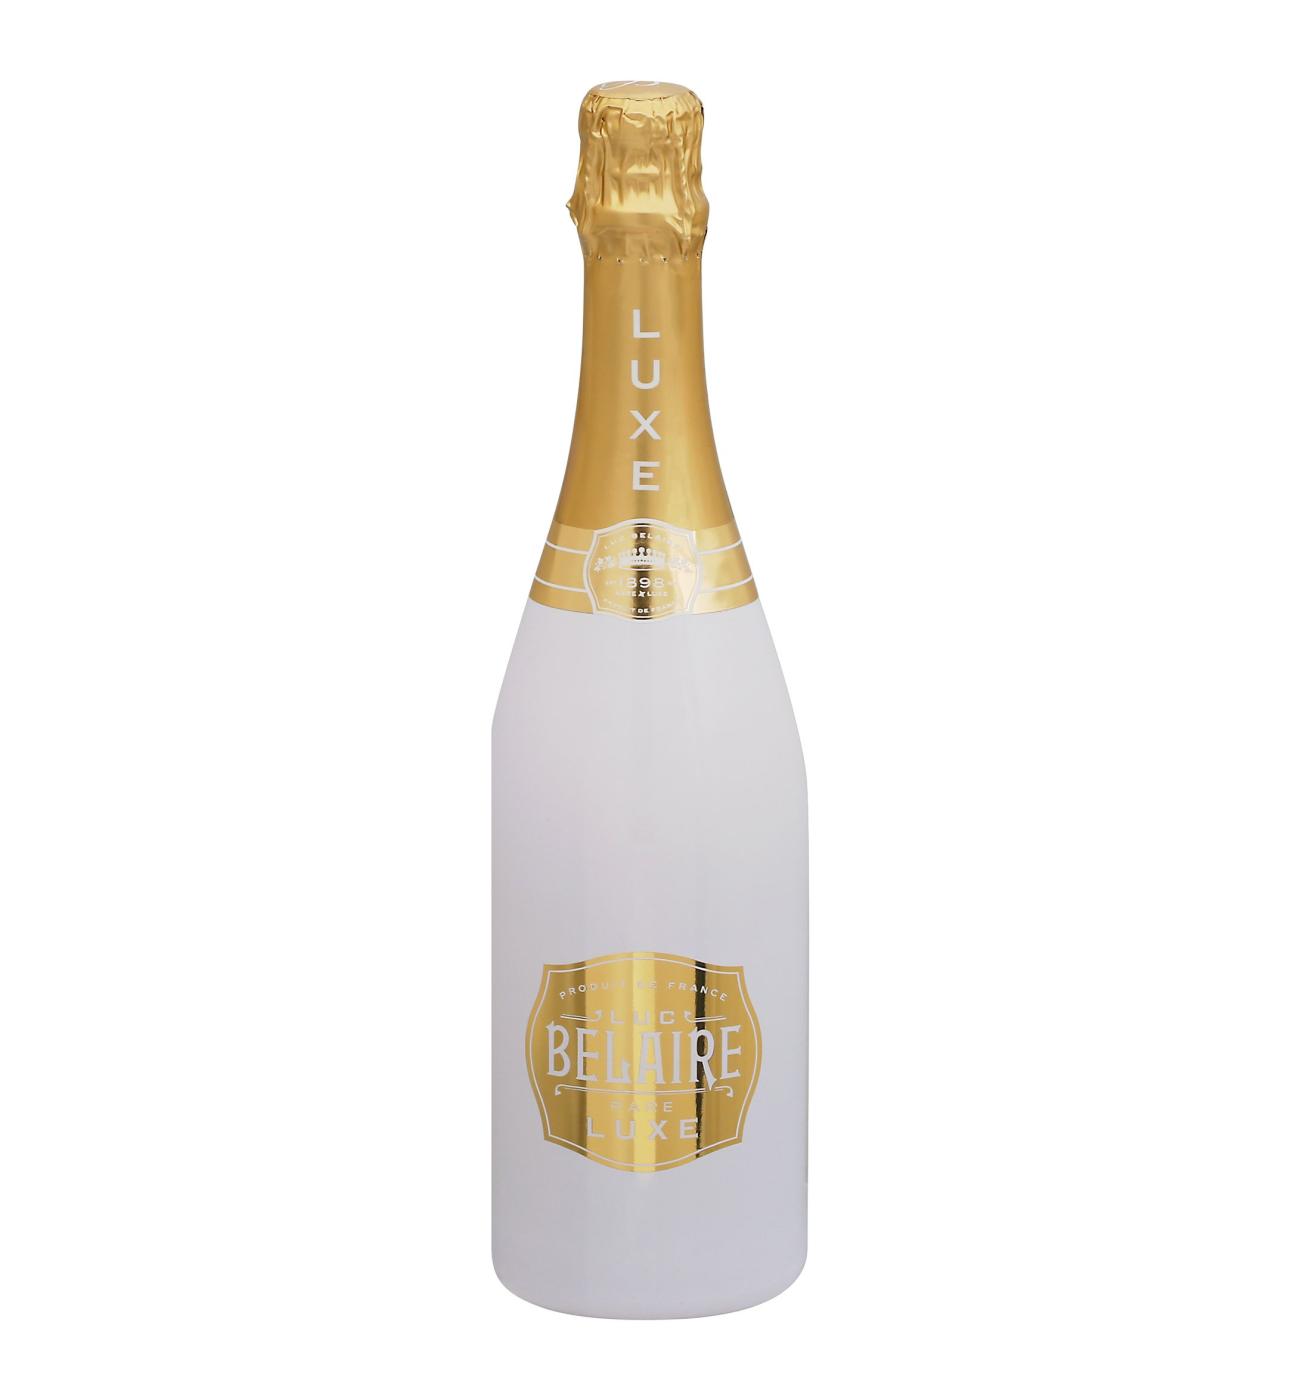 Luc Belaire Luxe; image 1 of 2